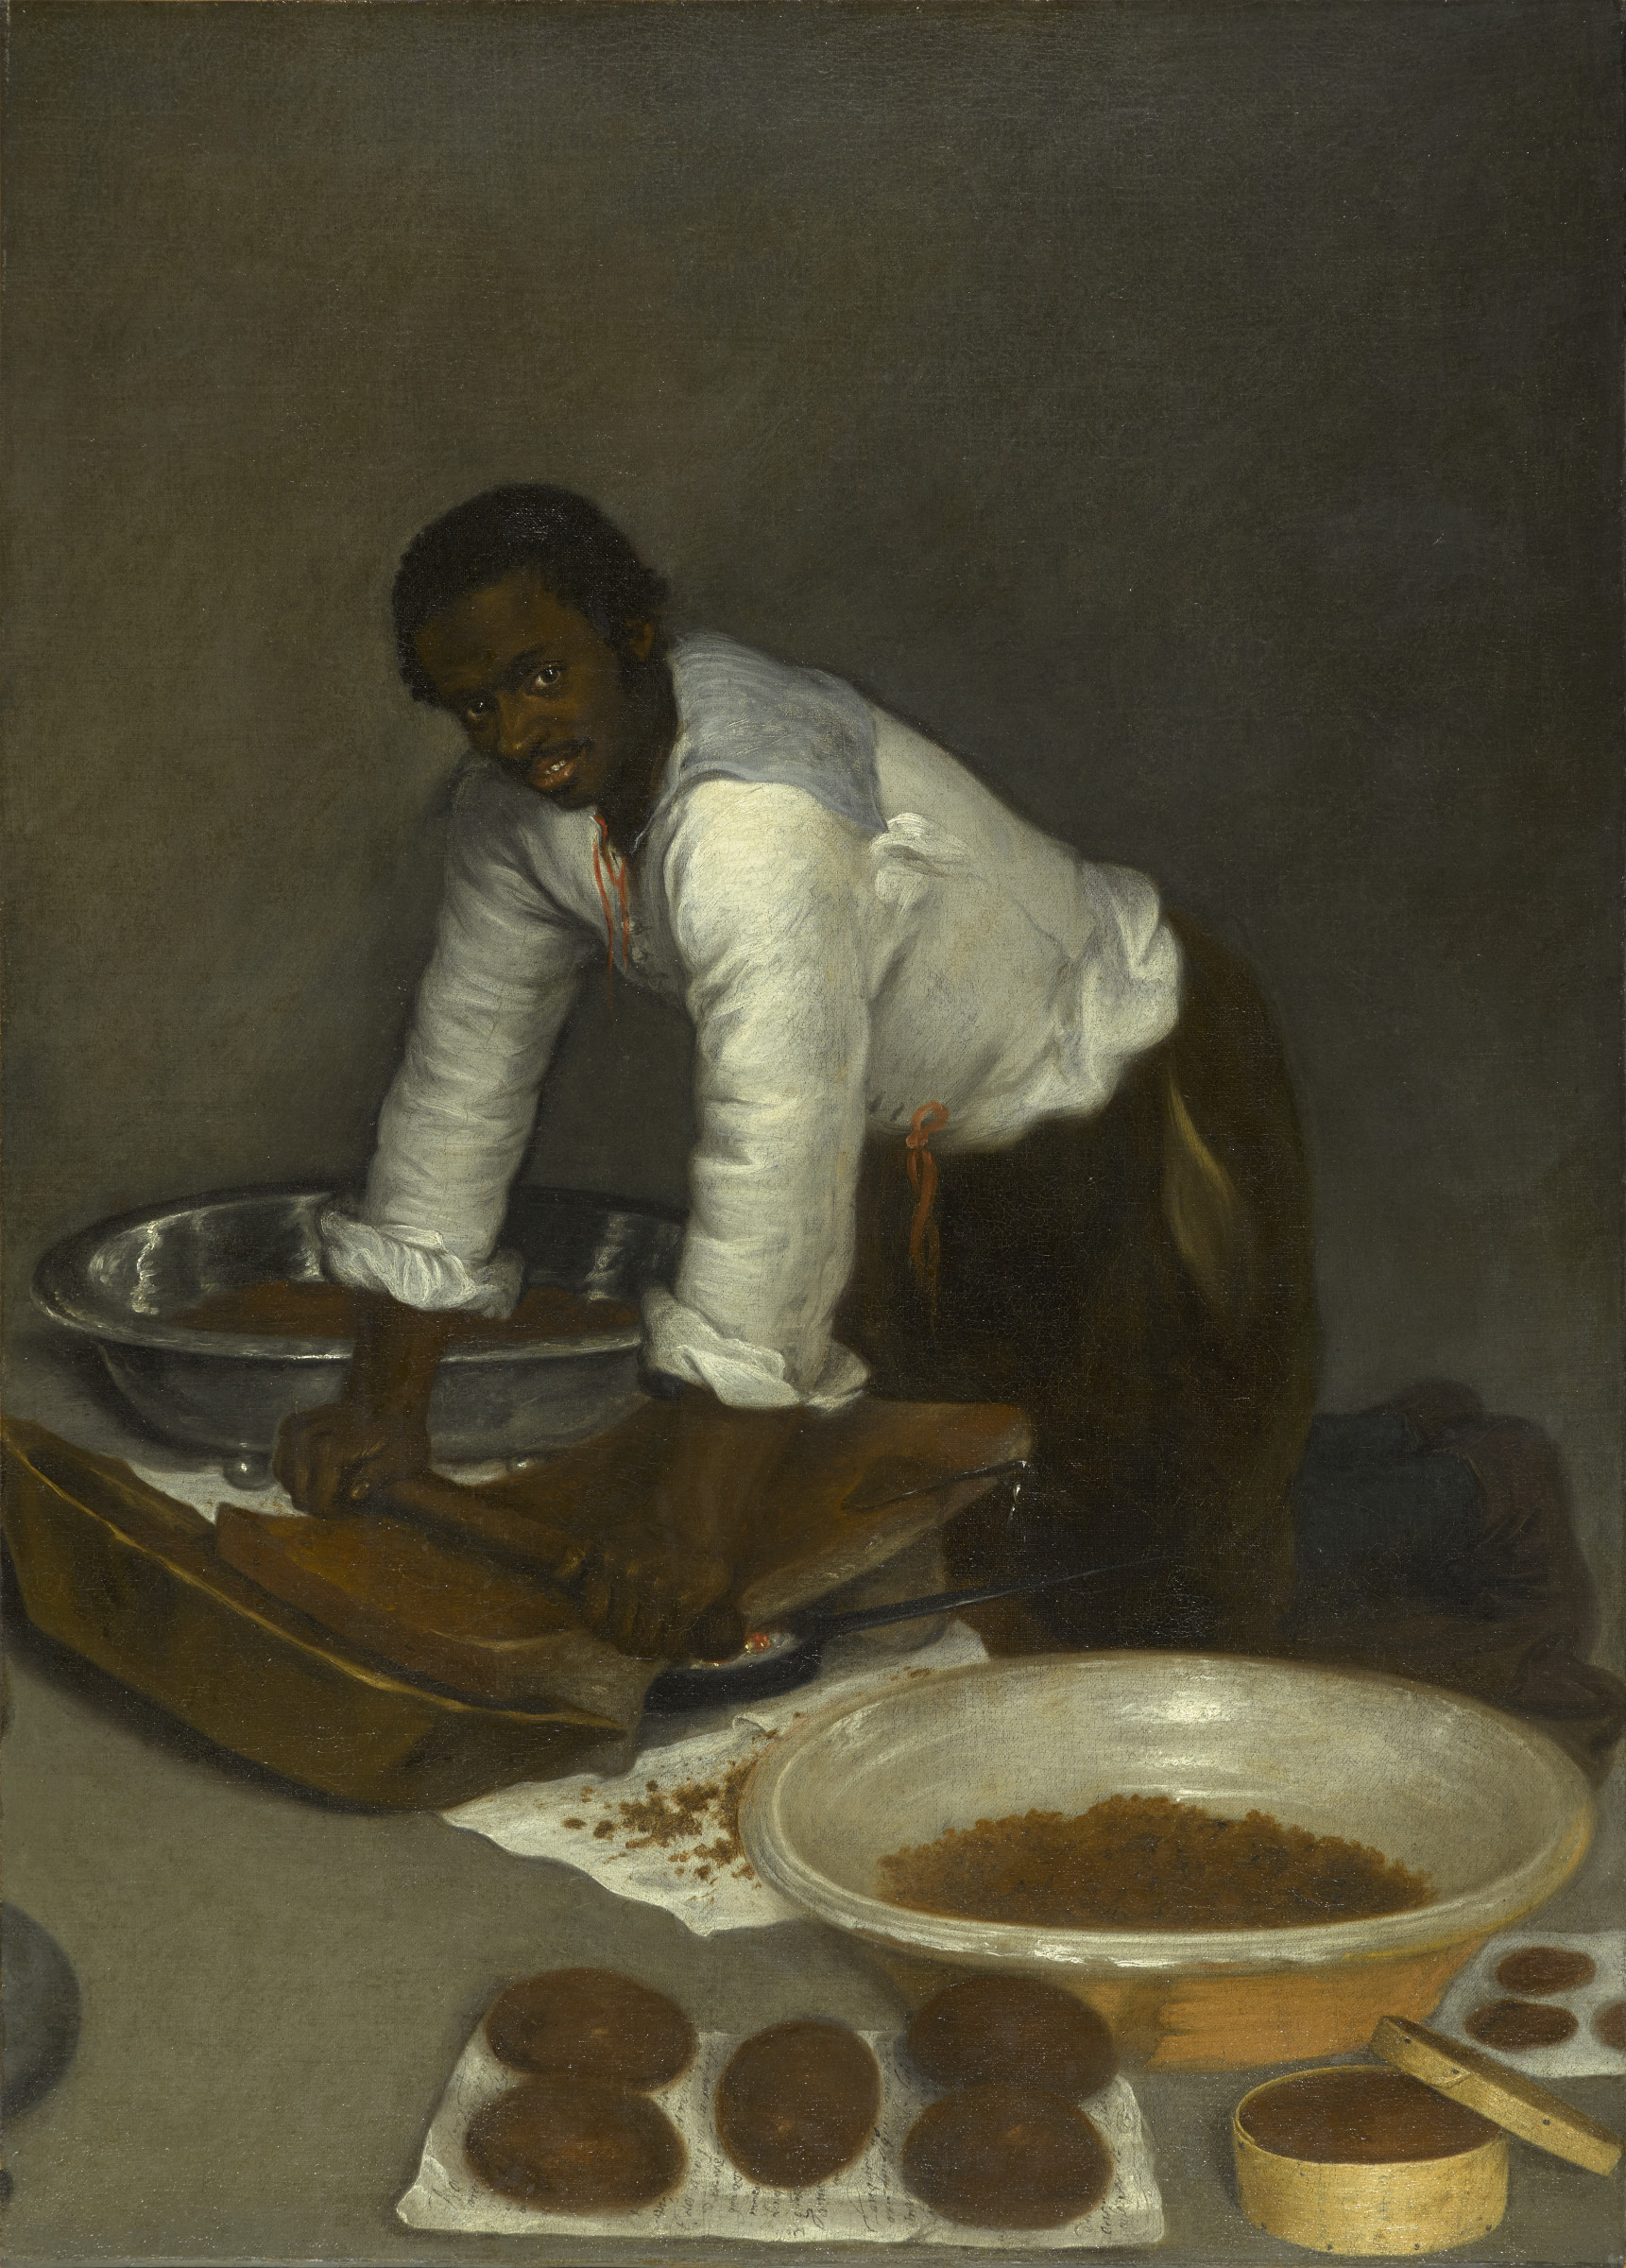 A Man Scraping Chocolate by Unknown Artist - ca 1680-1780 - 104.1 x 71.1 cm North Carolina Museum of Art